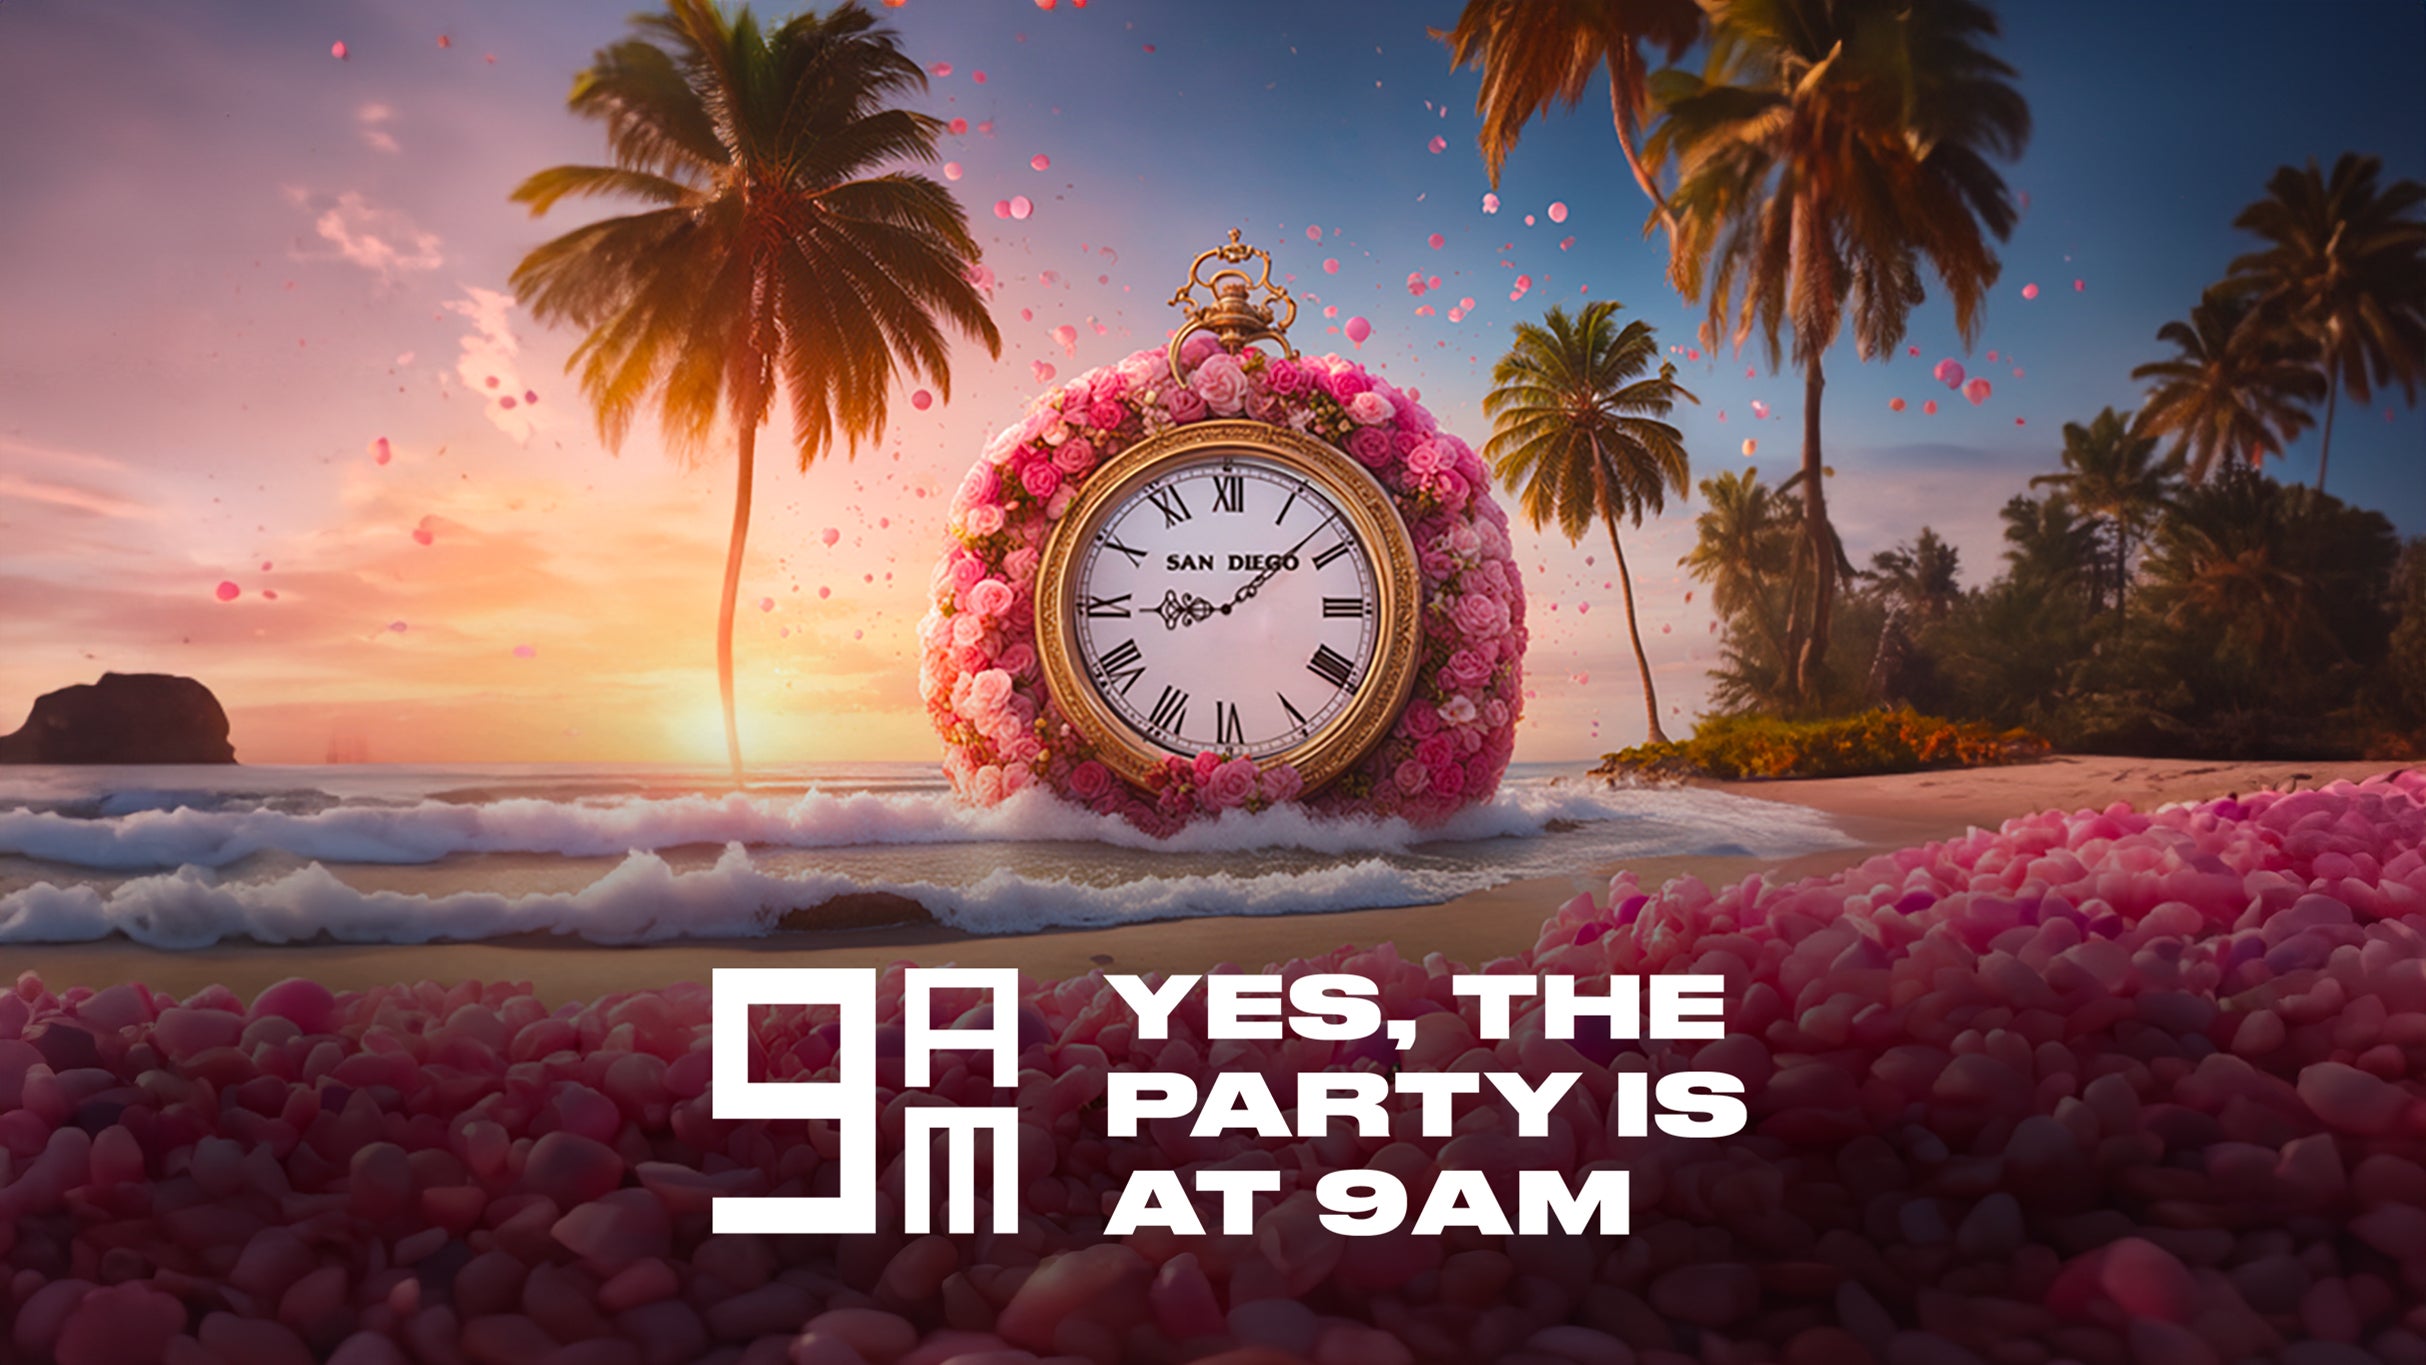 THE 9AM BANGER Presents: Rise and Rose'! Yes, The Party is at 9AM! 21+ in San Diego promo photo for 2 For 1 presale offer code